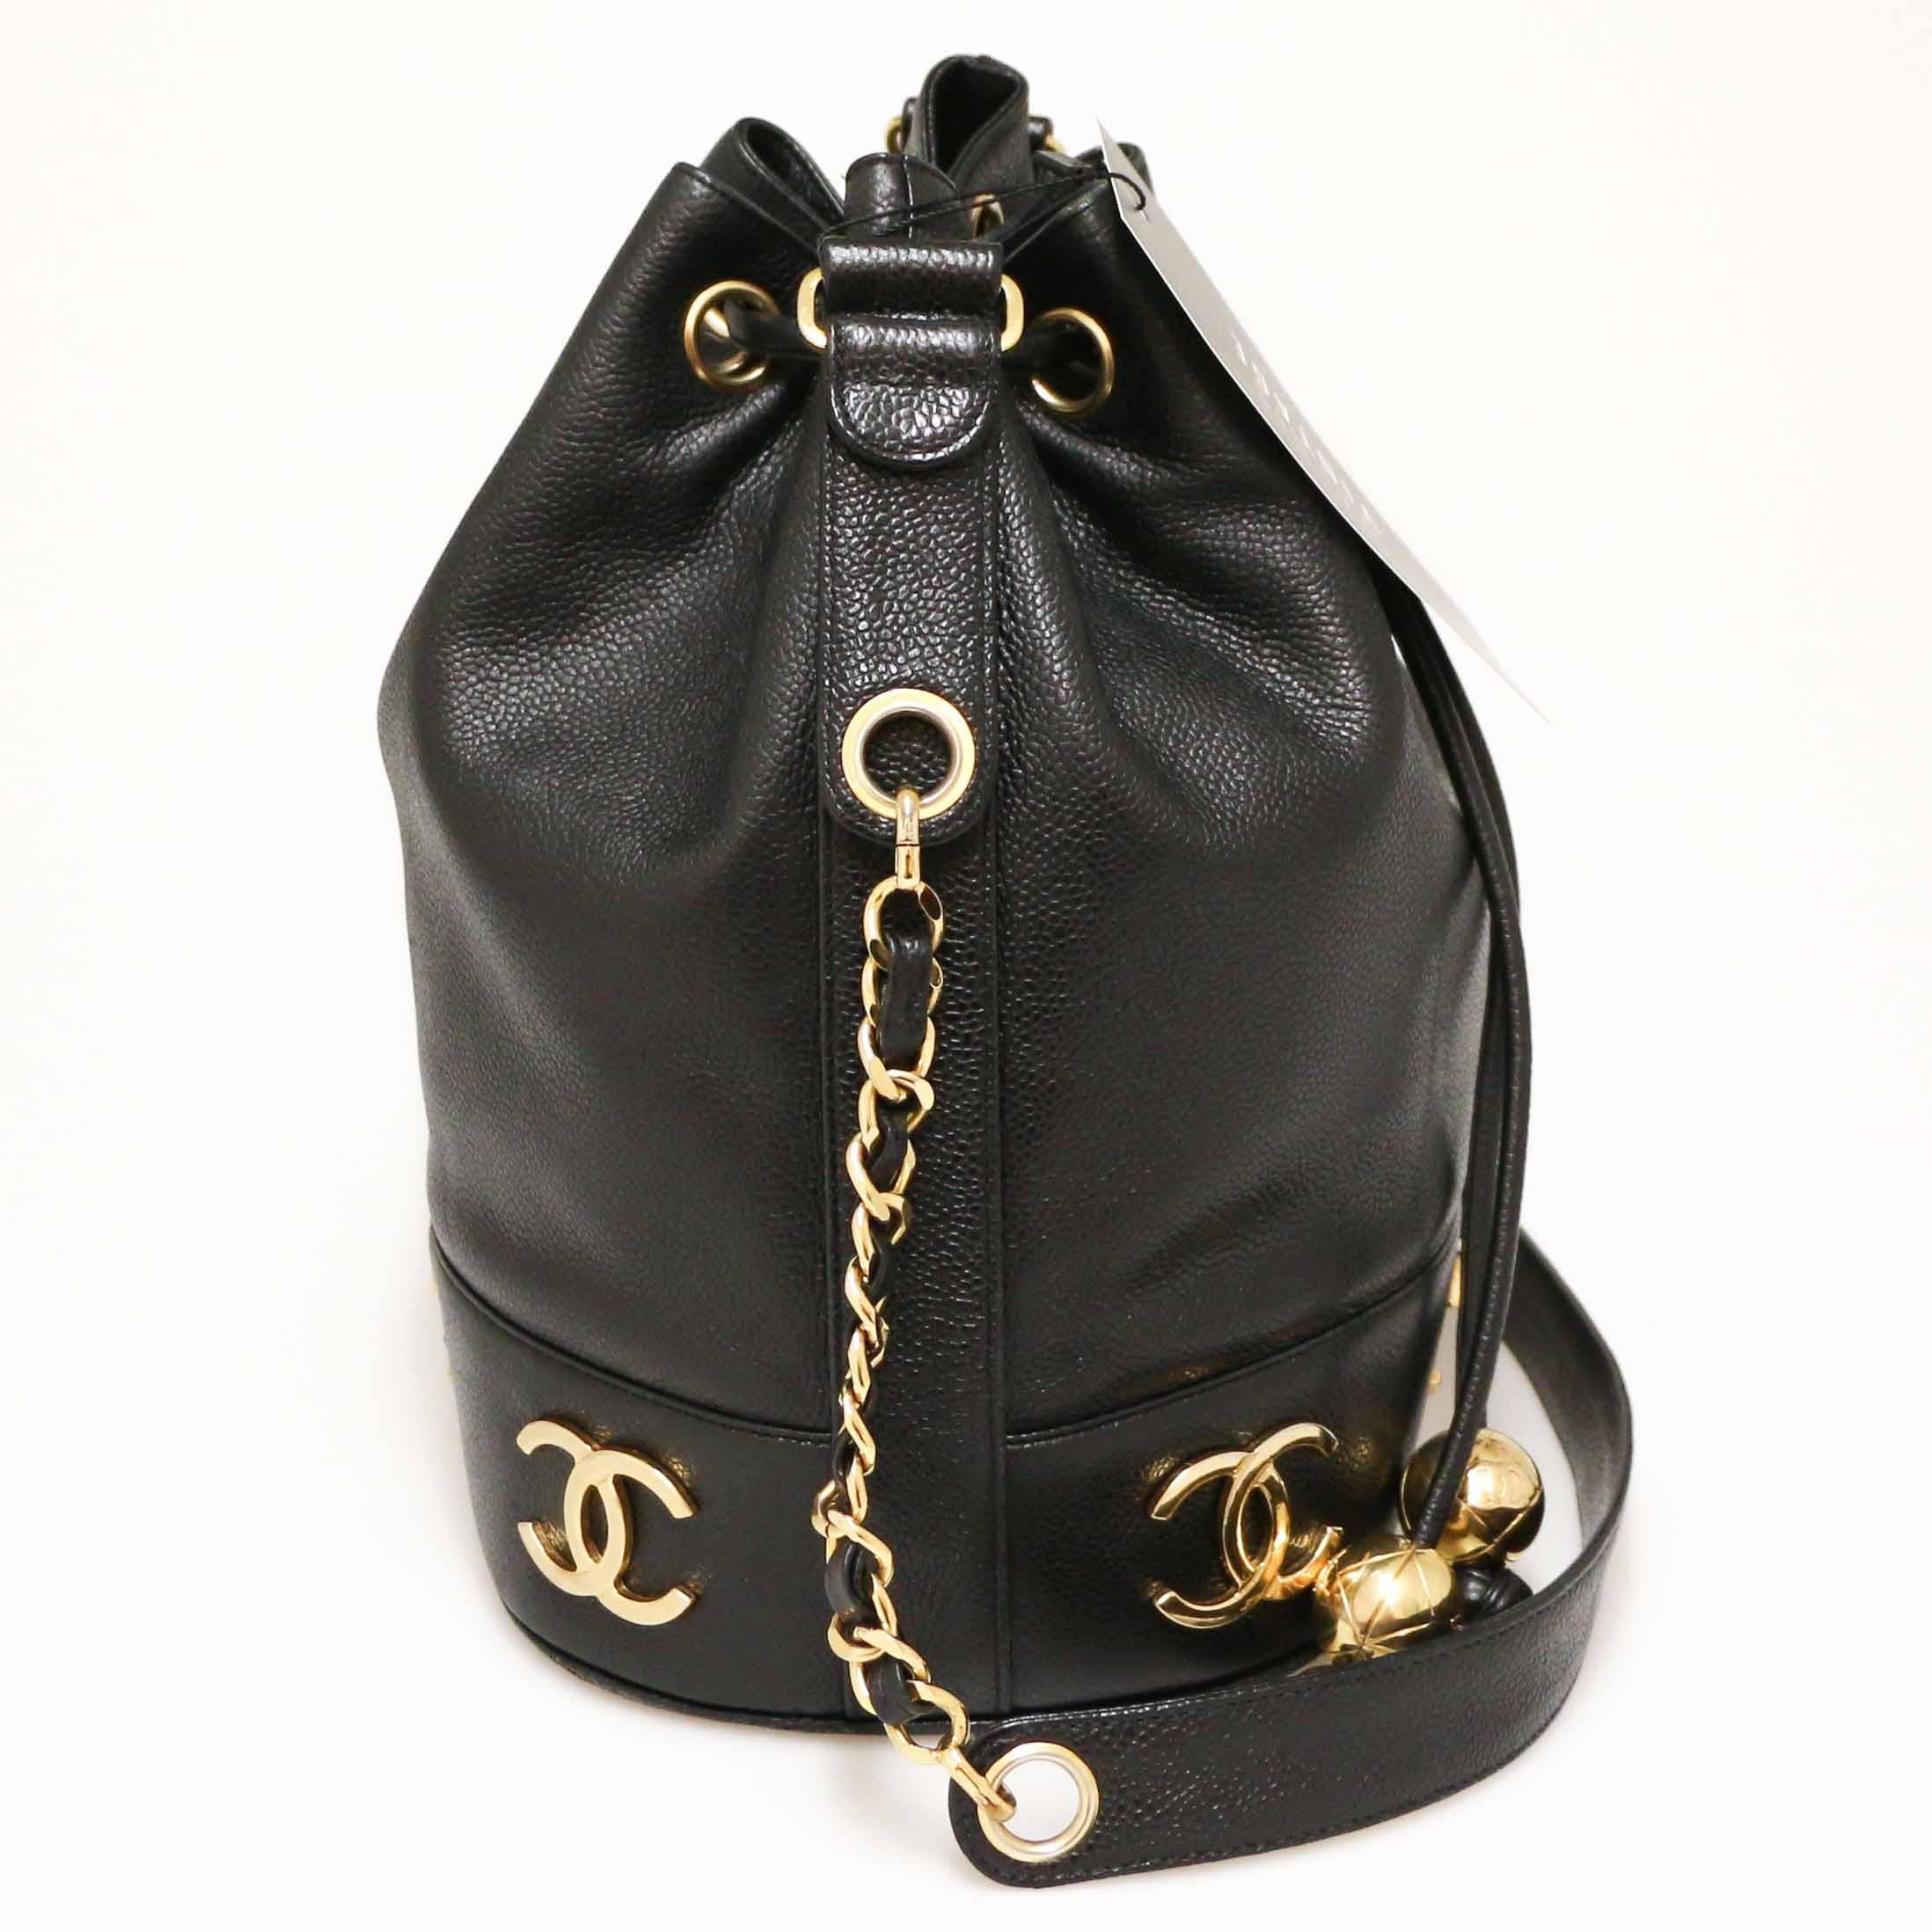 Wonderful vintage bucket bag with small pouch :
this bag is perfect for every day use or even for a fun night out !

Condition : very good
Made in France
Material : caviar leather
Interior : black leather
Color : black
Dimensions : 30 x 28 x 17